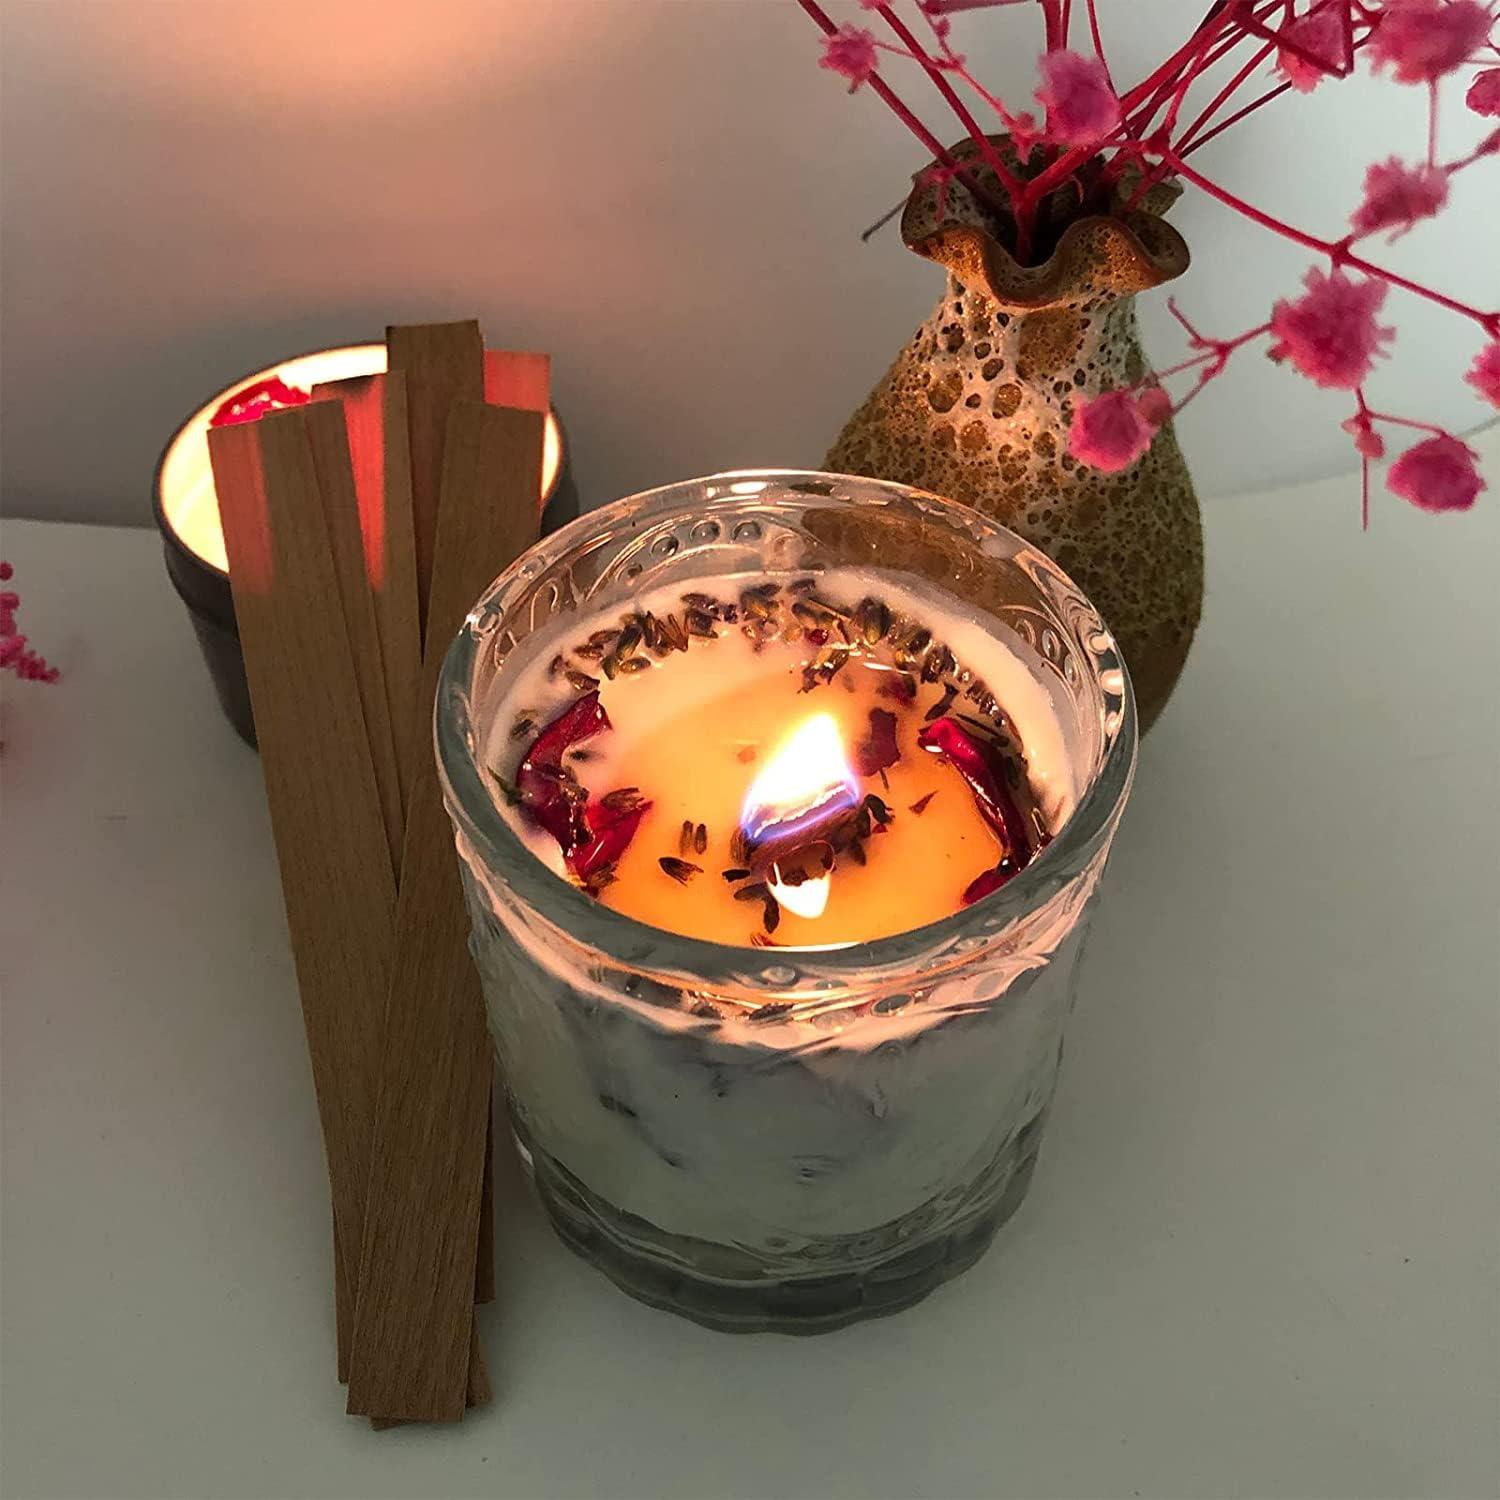 Upgraded 150pcs Wooden Candle Wicks and Stands 5.1 x 0.5 inch Natural Candle Wood Wicks with Iron Base, Candle Cores for DIY Candle Making Craft